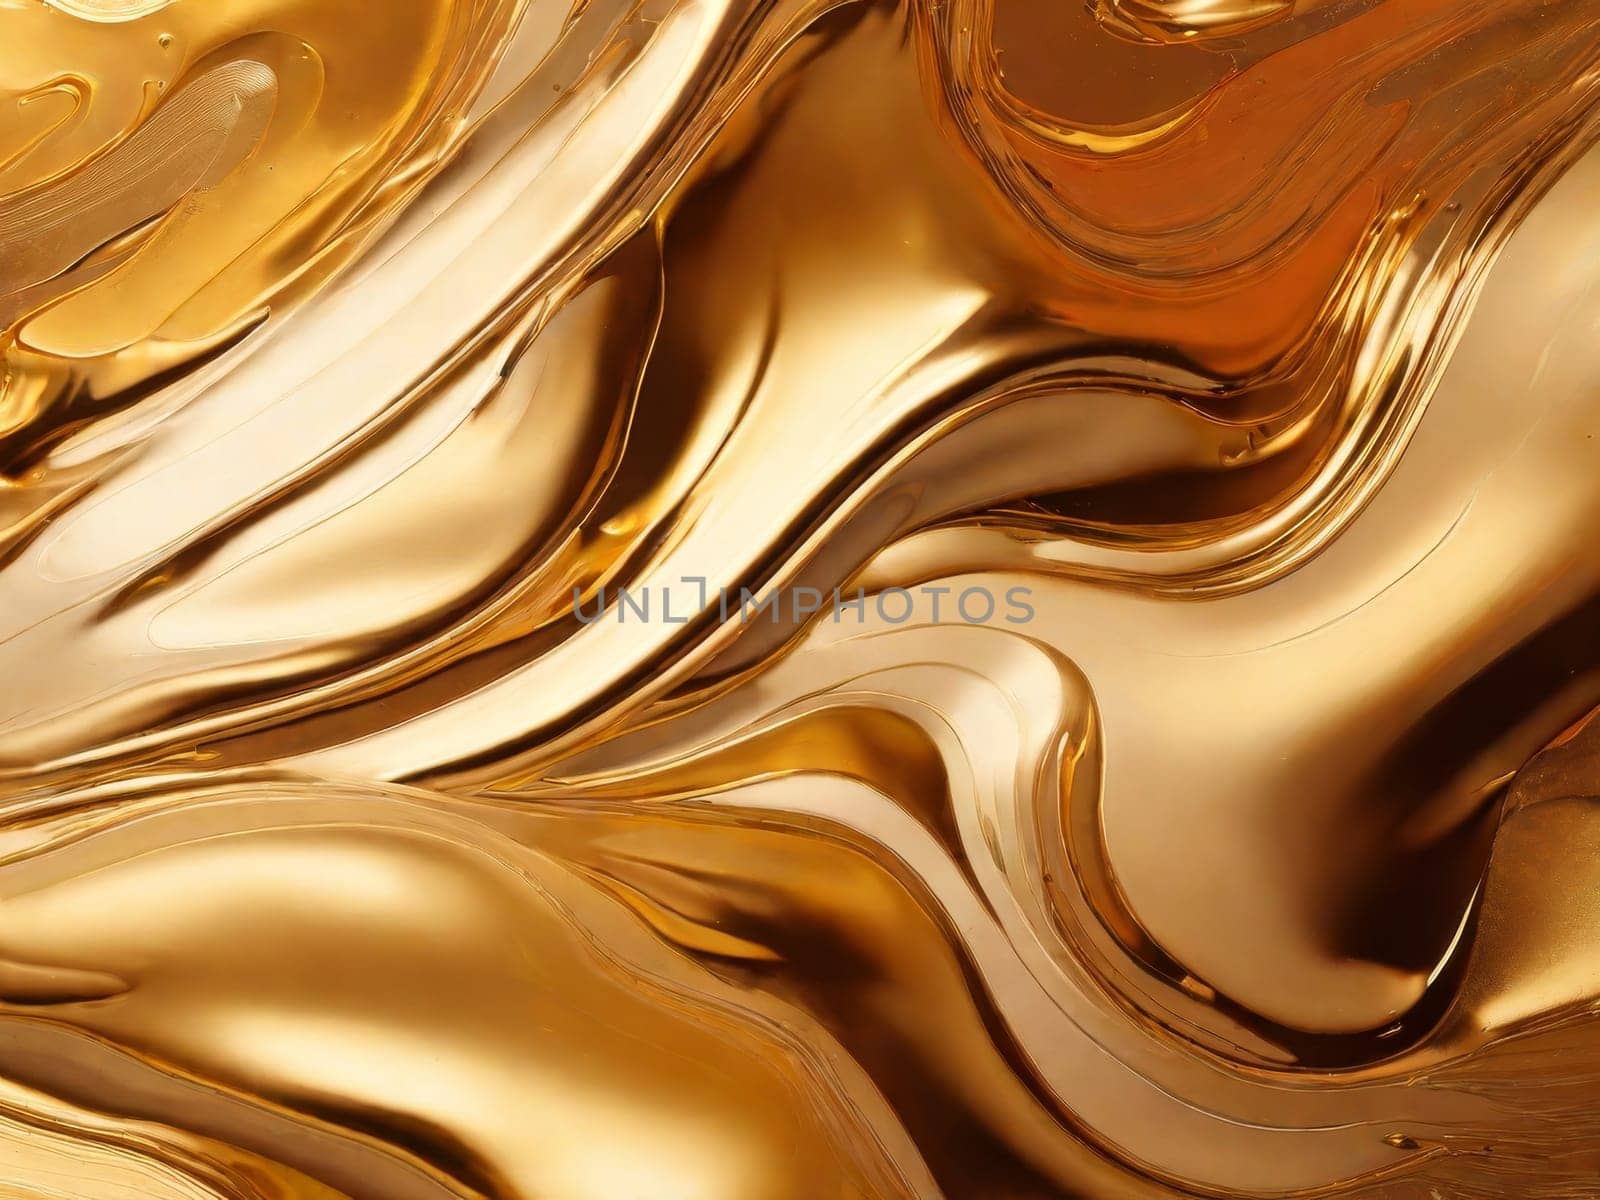 Painted background. Abstract emotional art. Modern design element. Golden liquid acrylic paints.